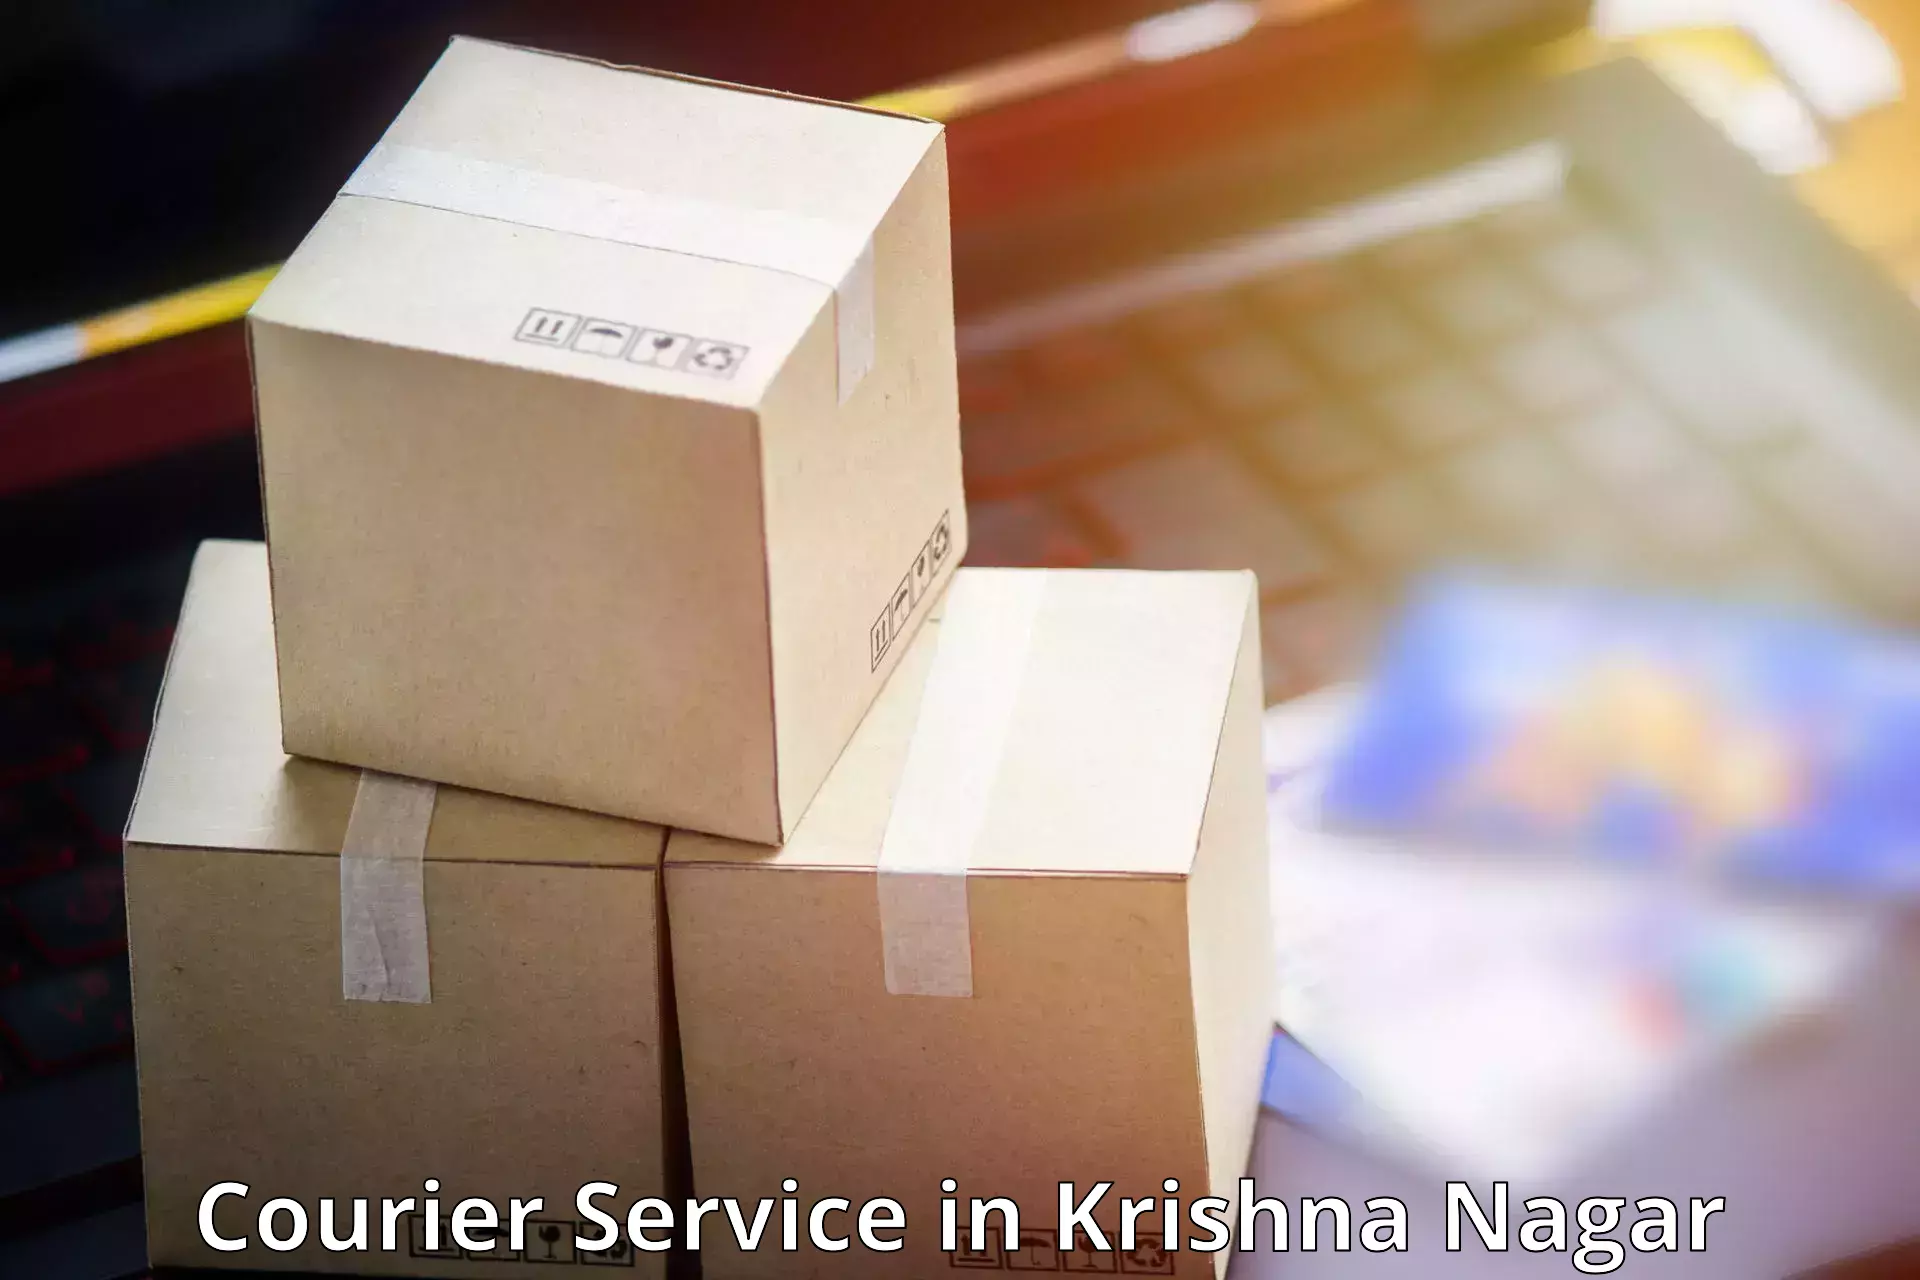 Personalized courier experiences in Krishna Nagar